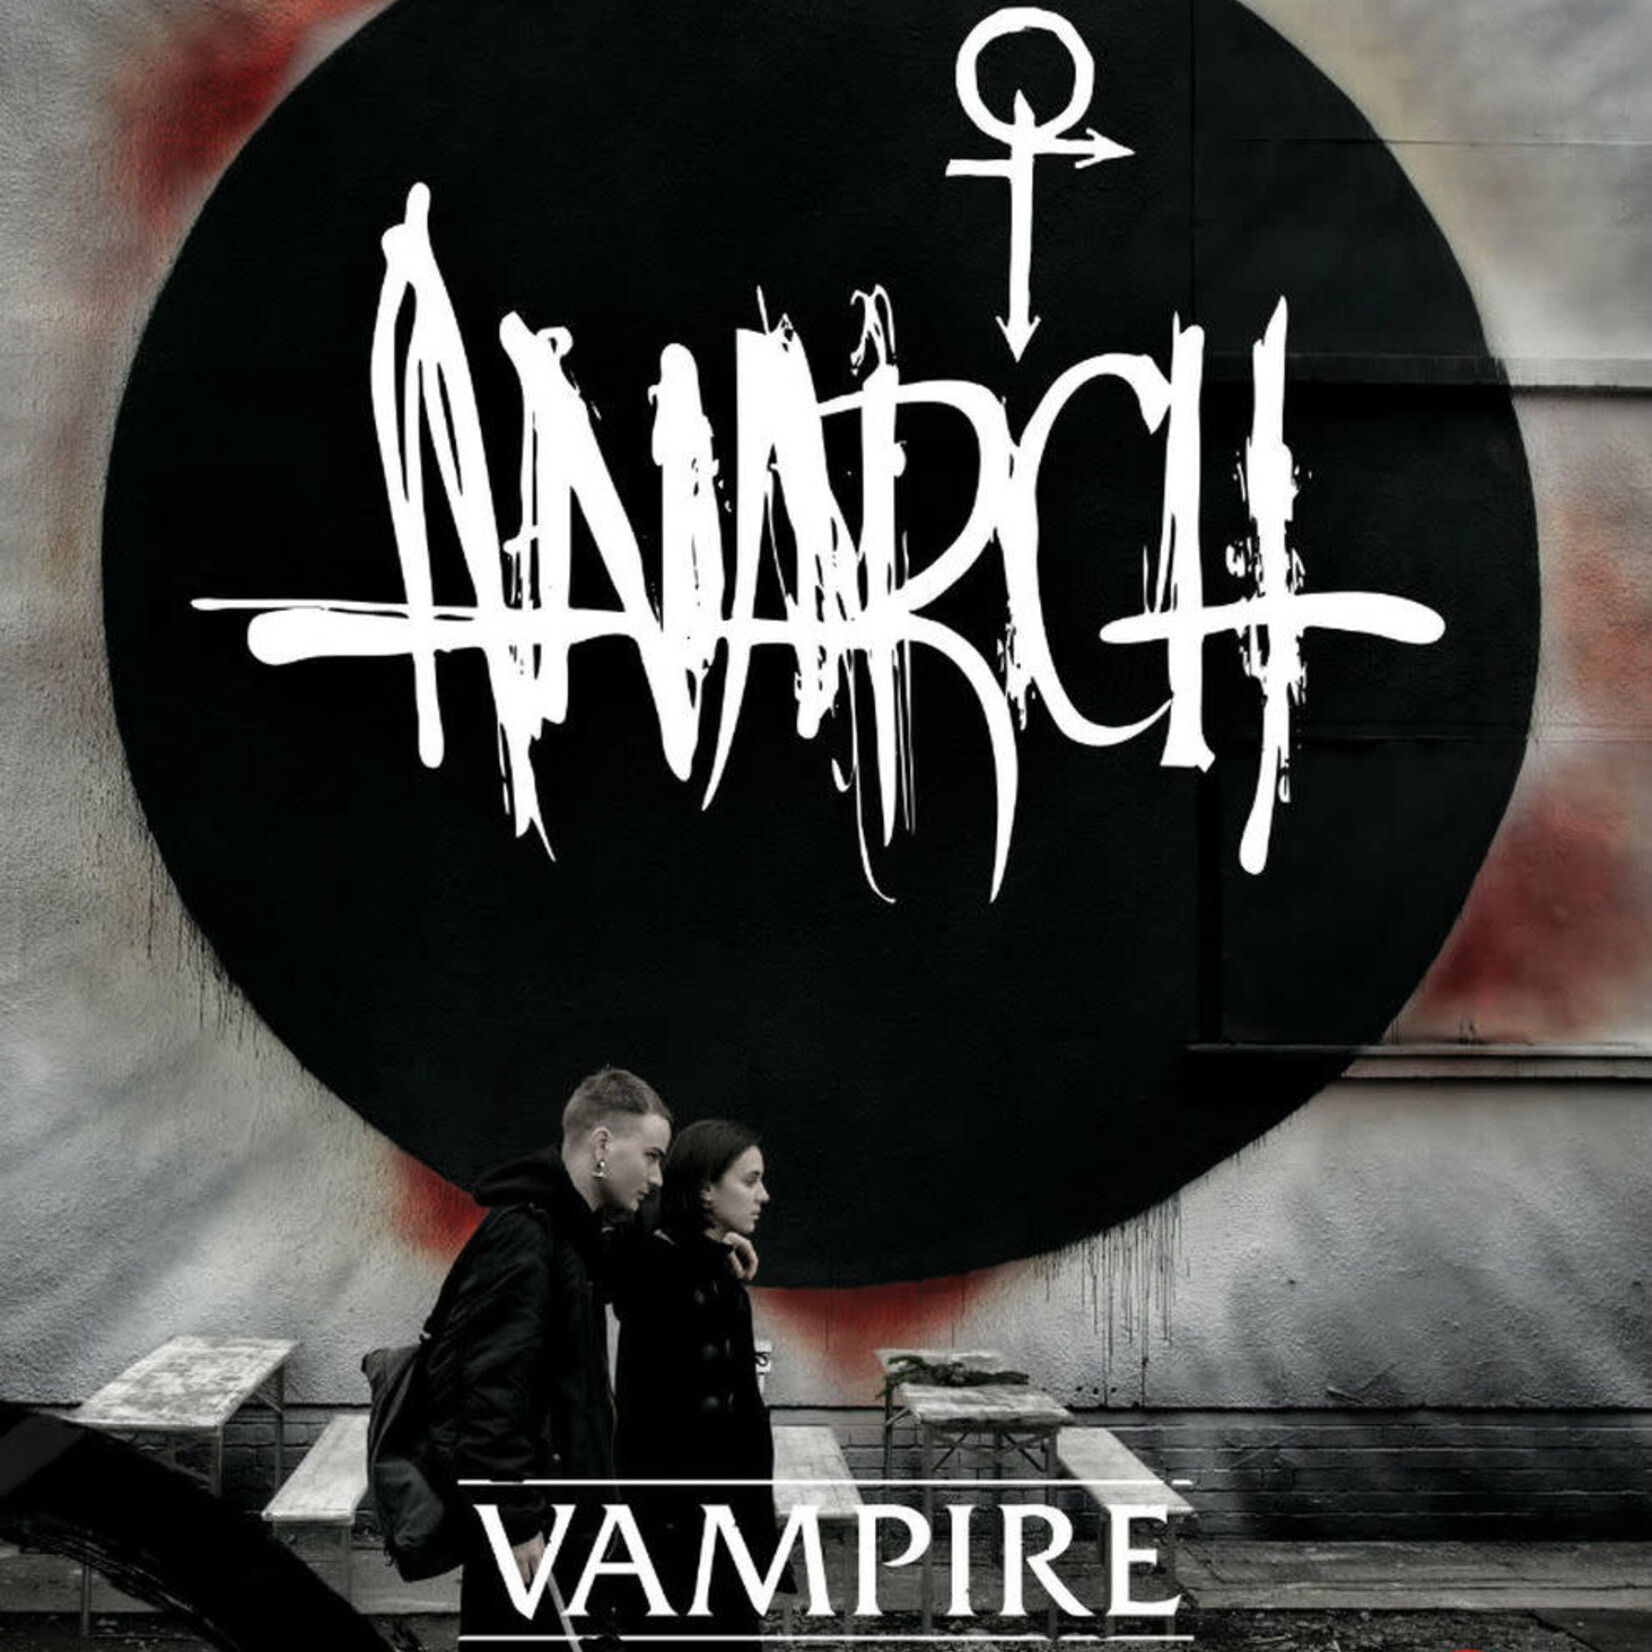 Onyx Path Publishing Vampire The Masquerade: Anarch Supplement Hardcover